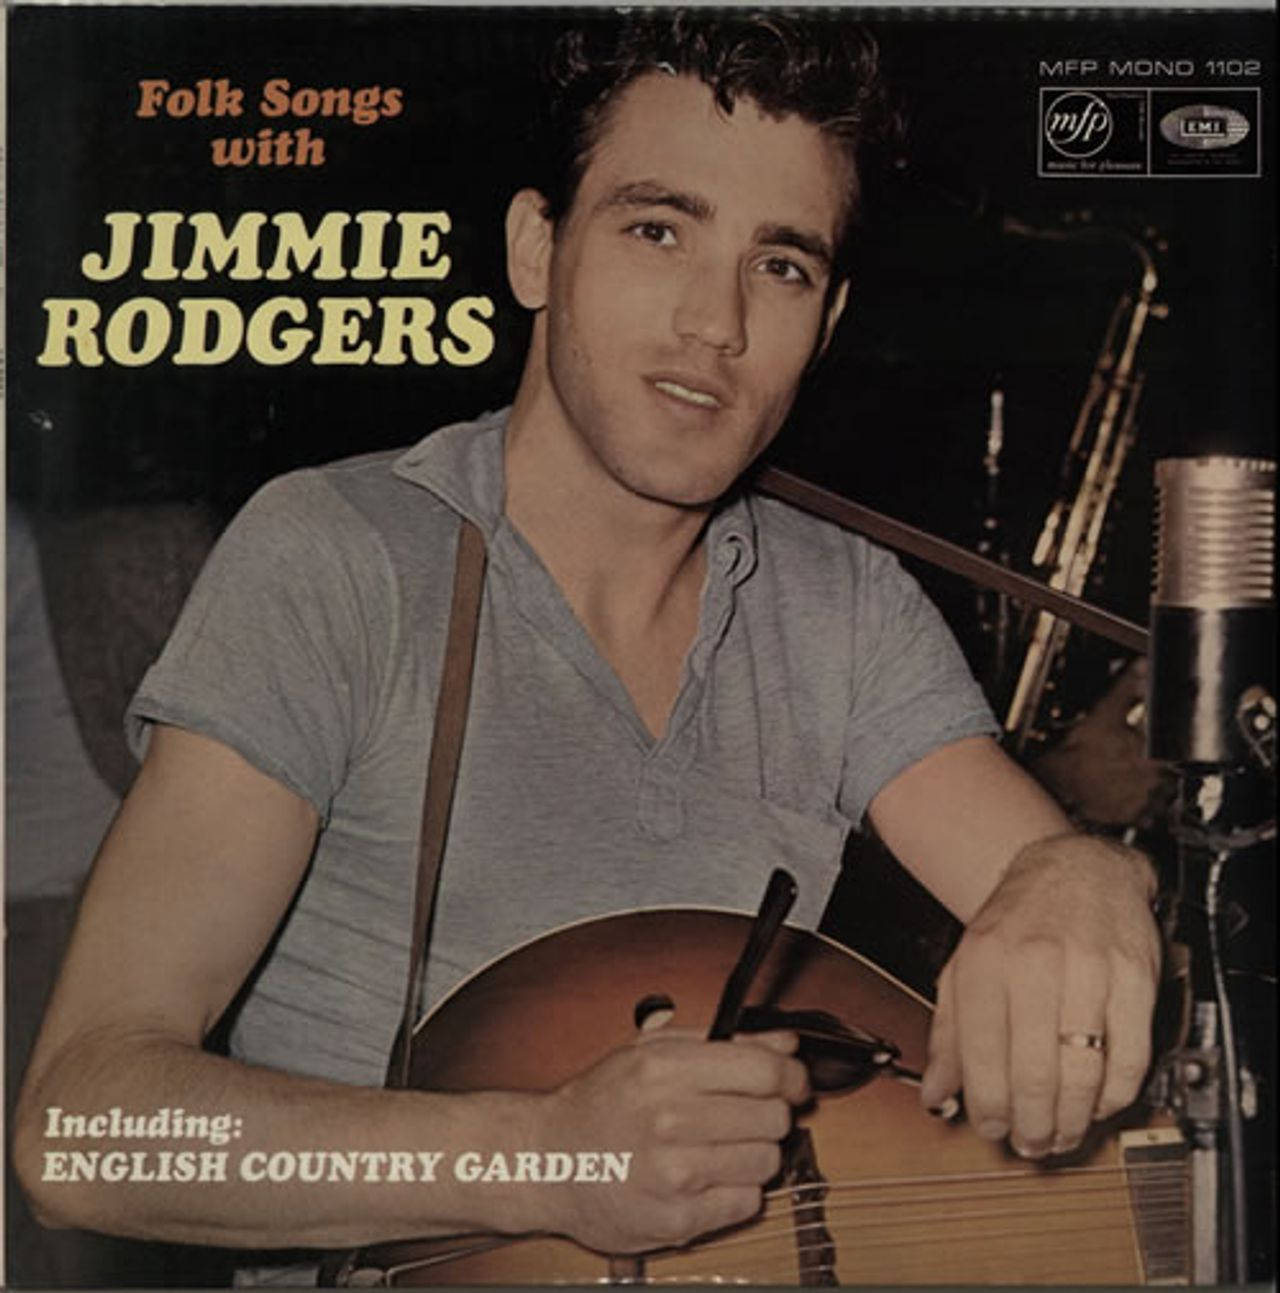 Folk Songs With Jimmie Rodgers Wallpaper